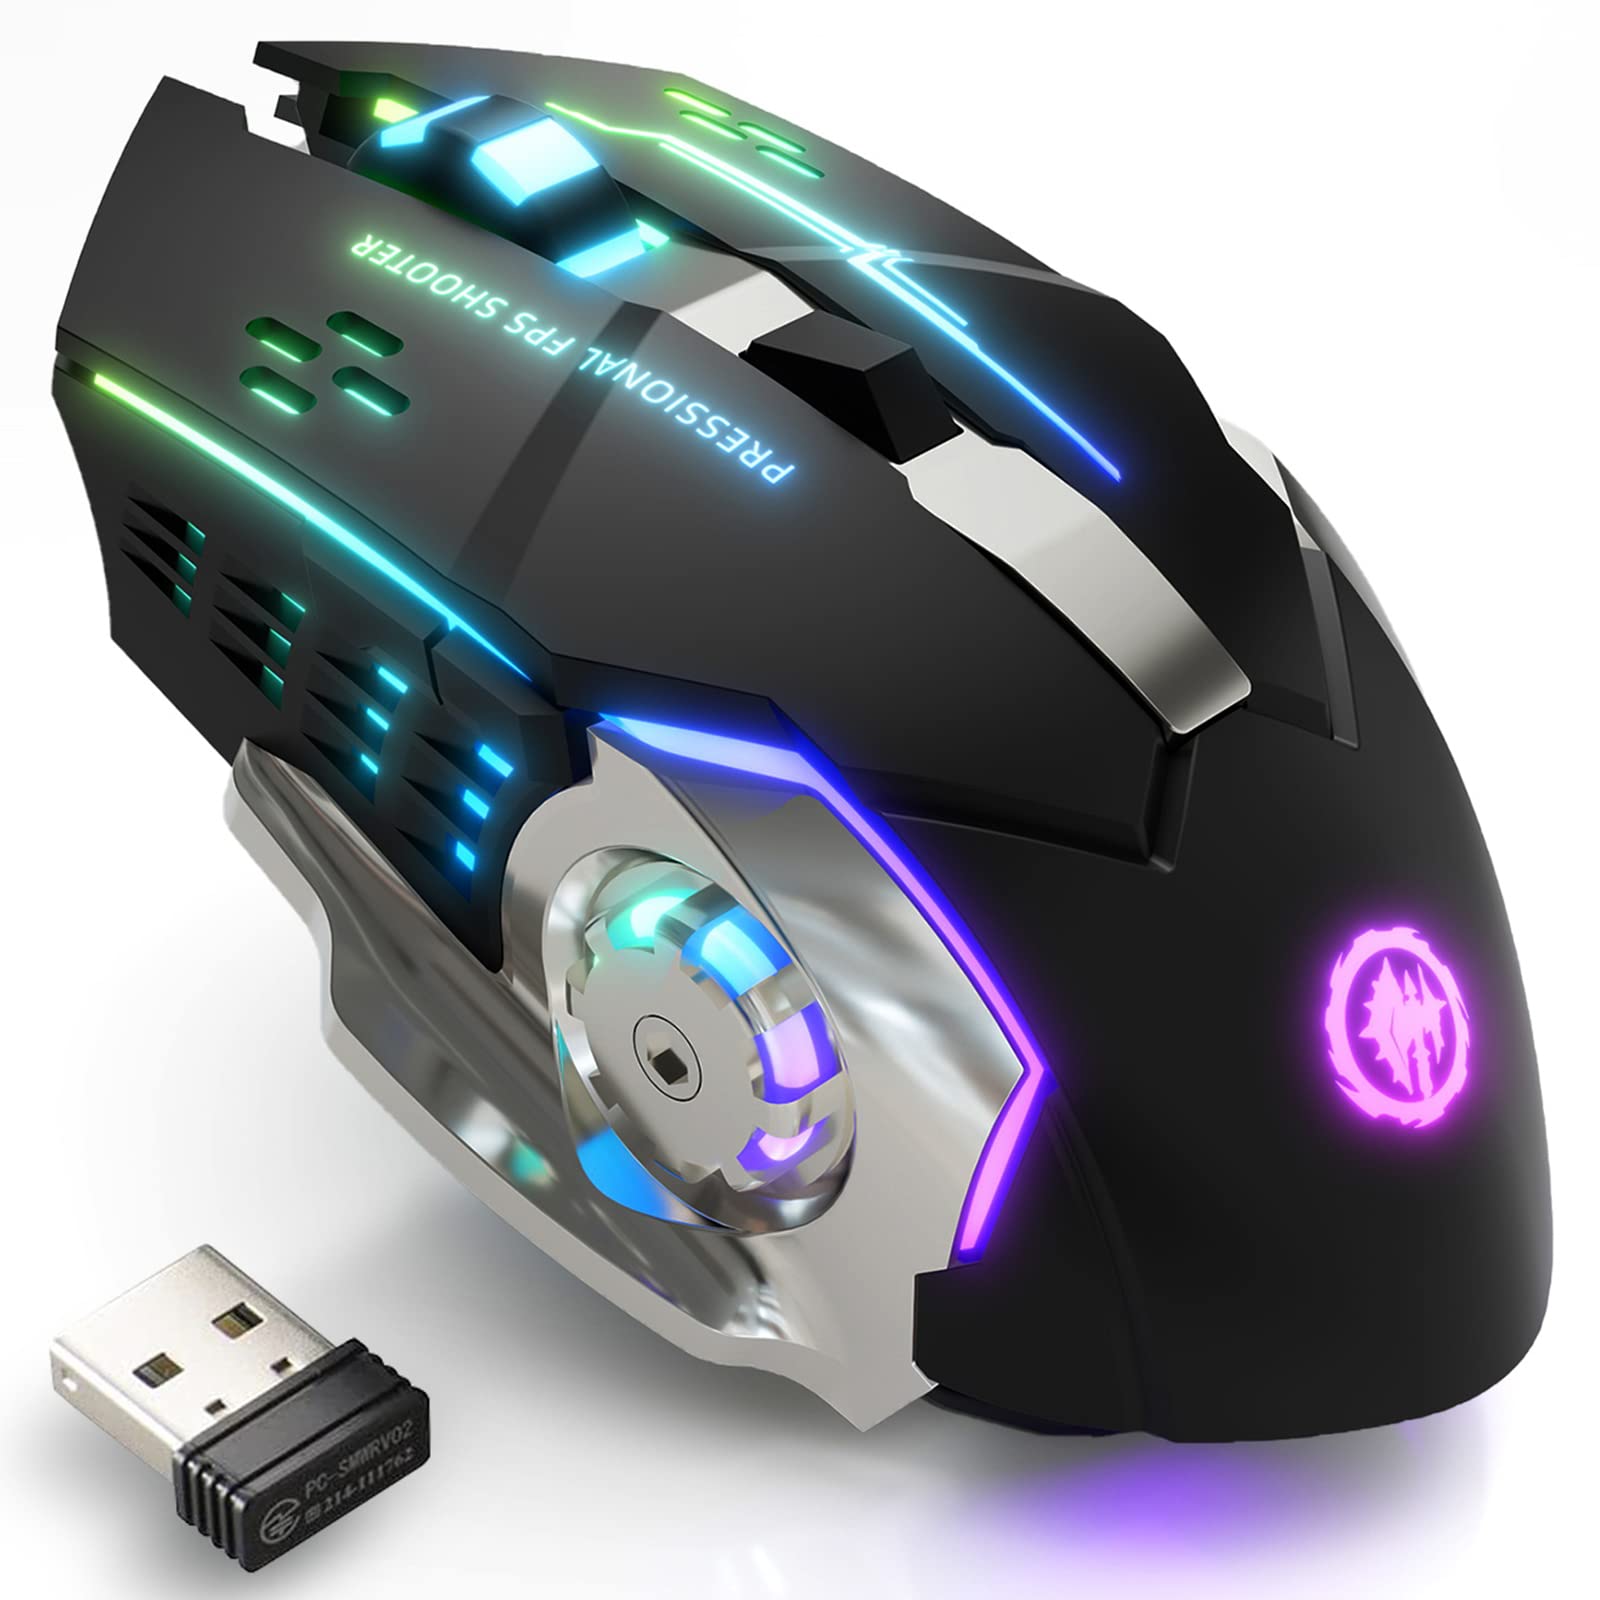 Wireless-mouse-bluetooth-mouse-gamer-rechargeable-computer-mouse-wireless-usb-ergonomic-mause-silent-mice-for-ipad-mac-laptop